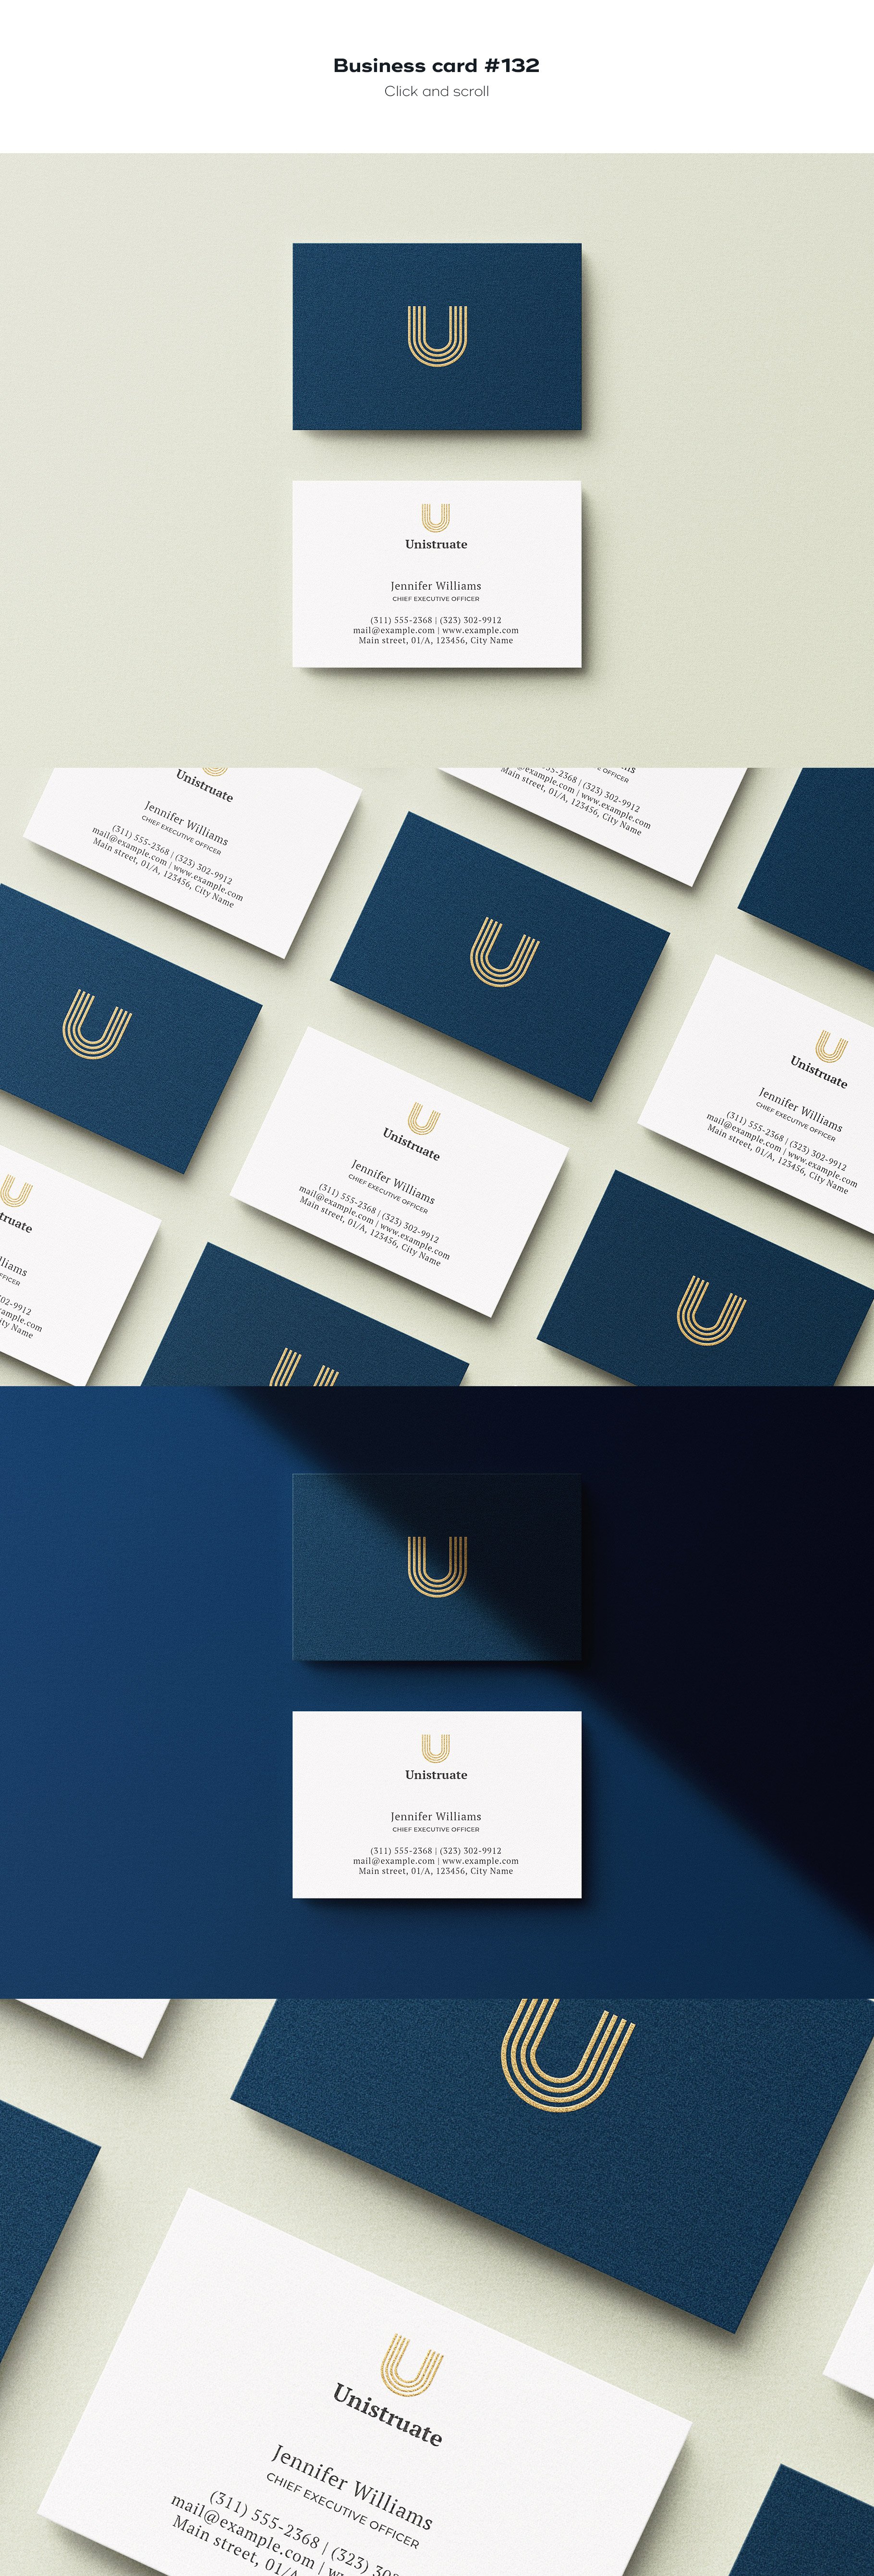 business card 132 923